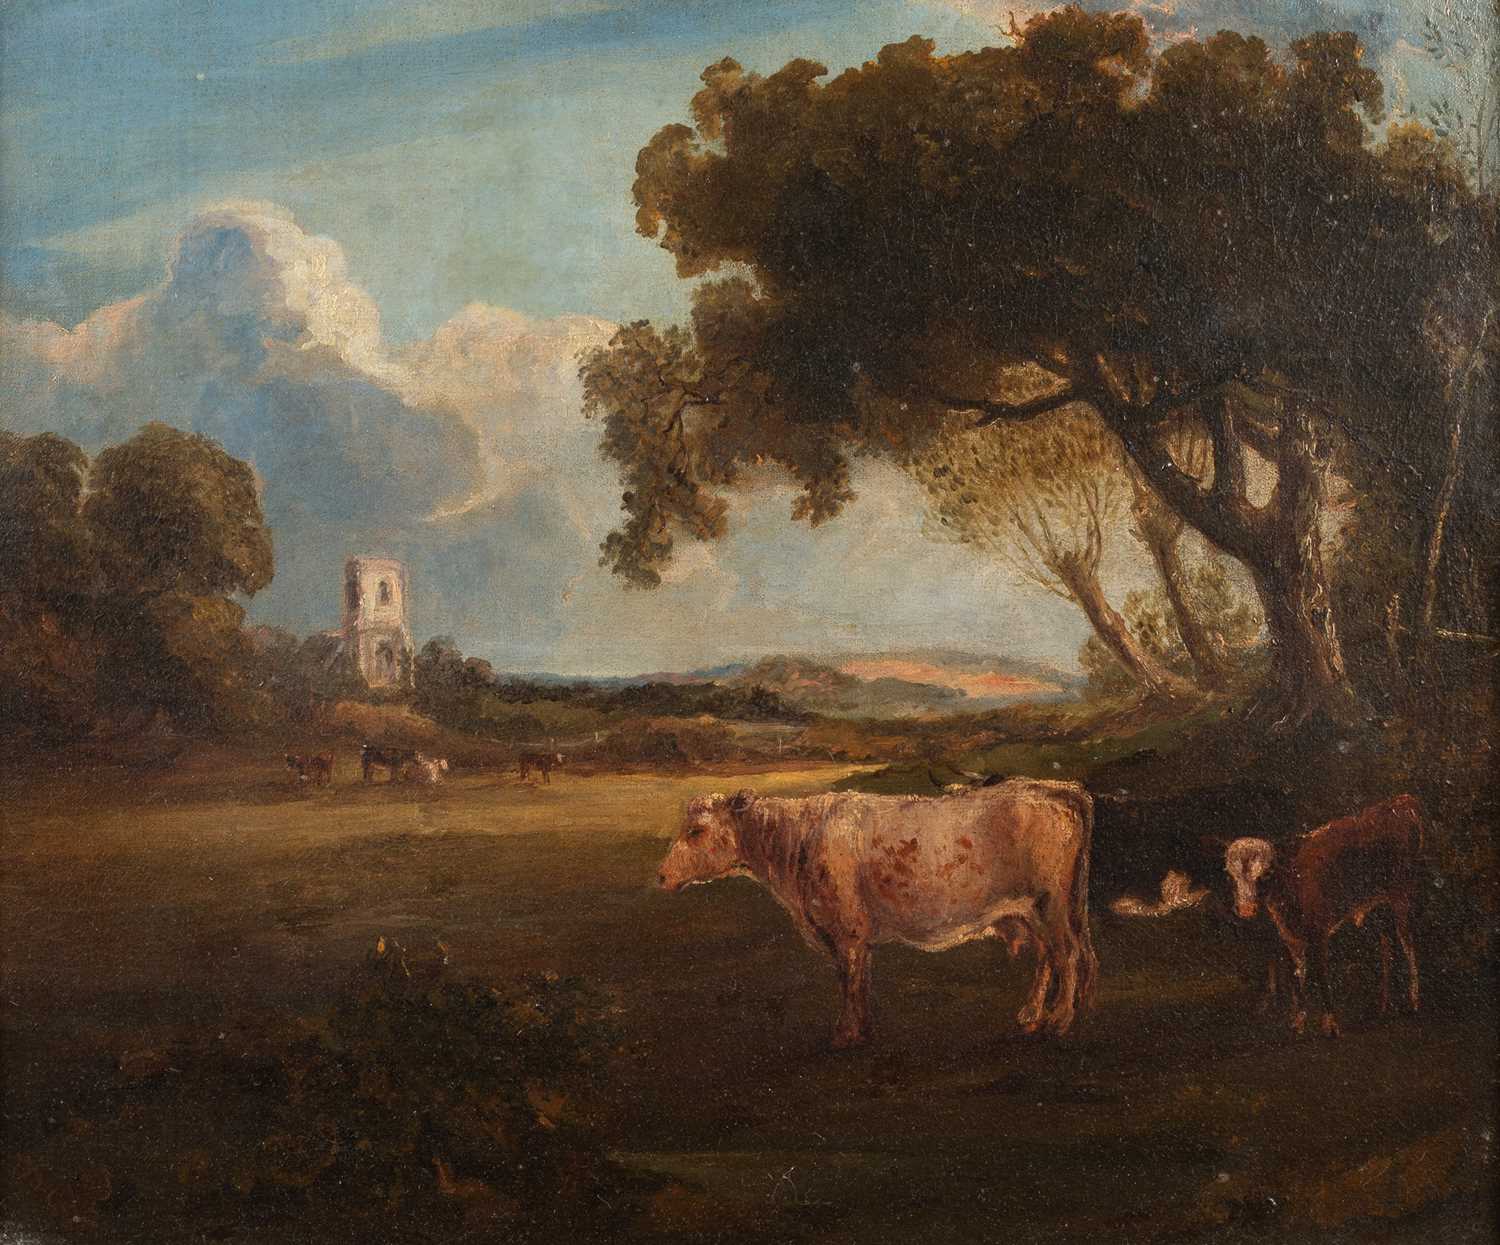 19th century English school, landscape with cattle by a tree with a distant church - Image 2 of 3